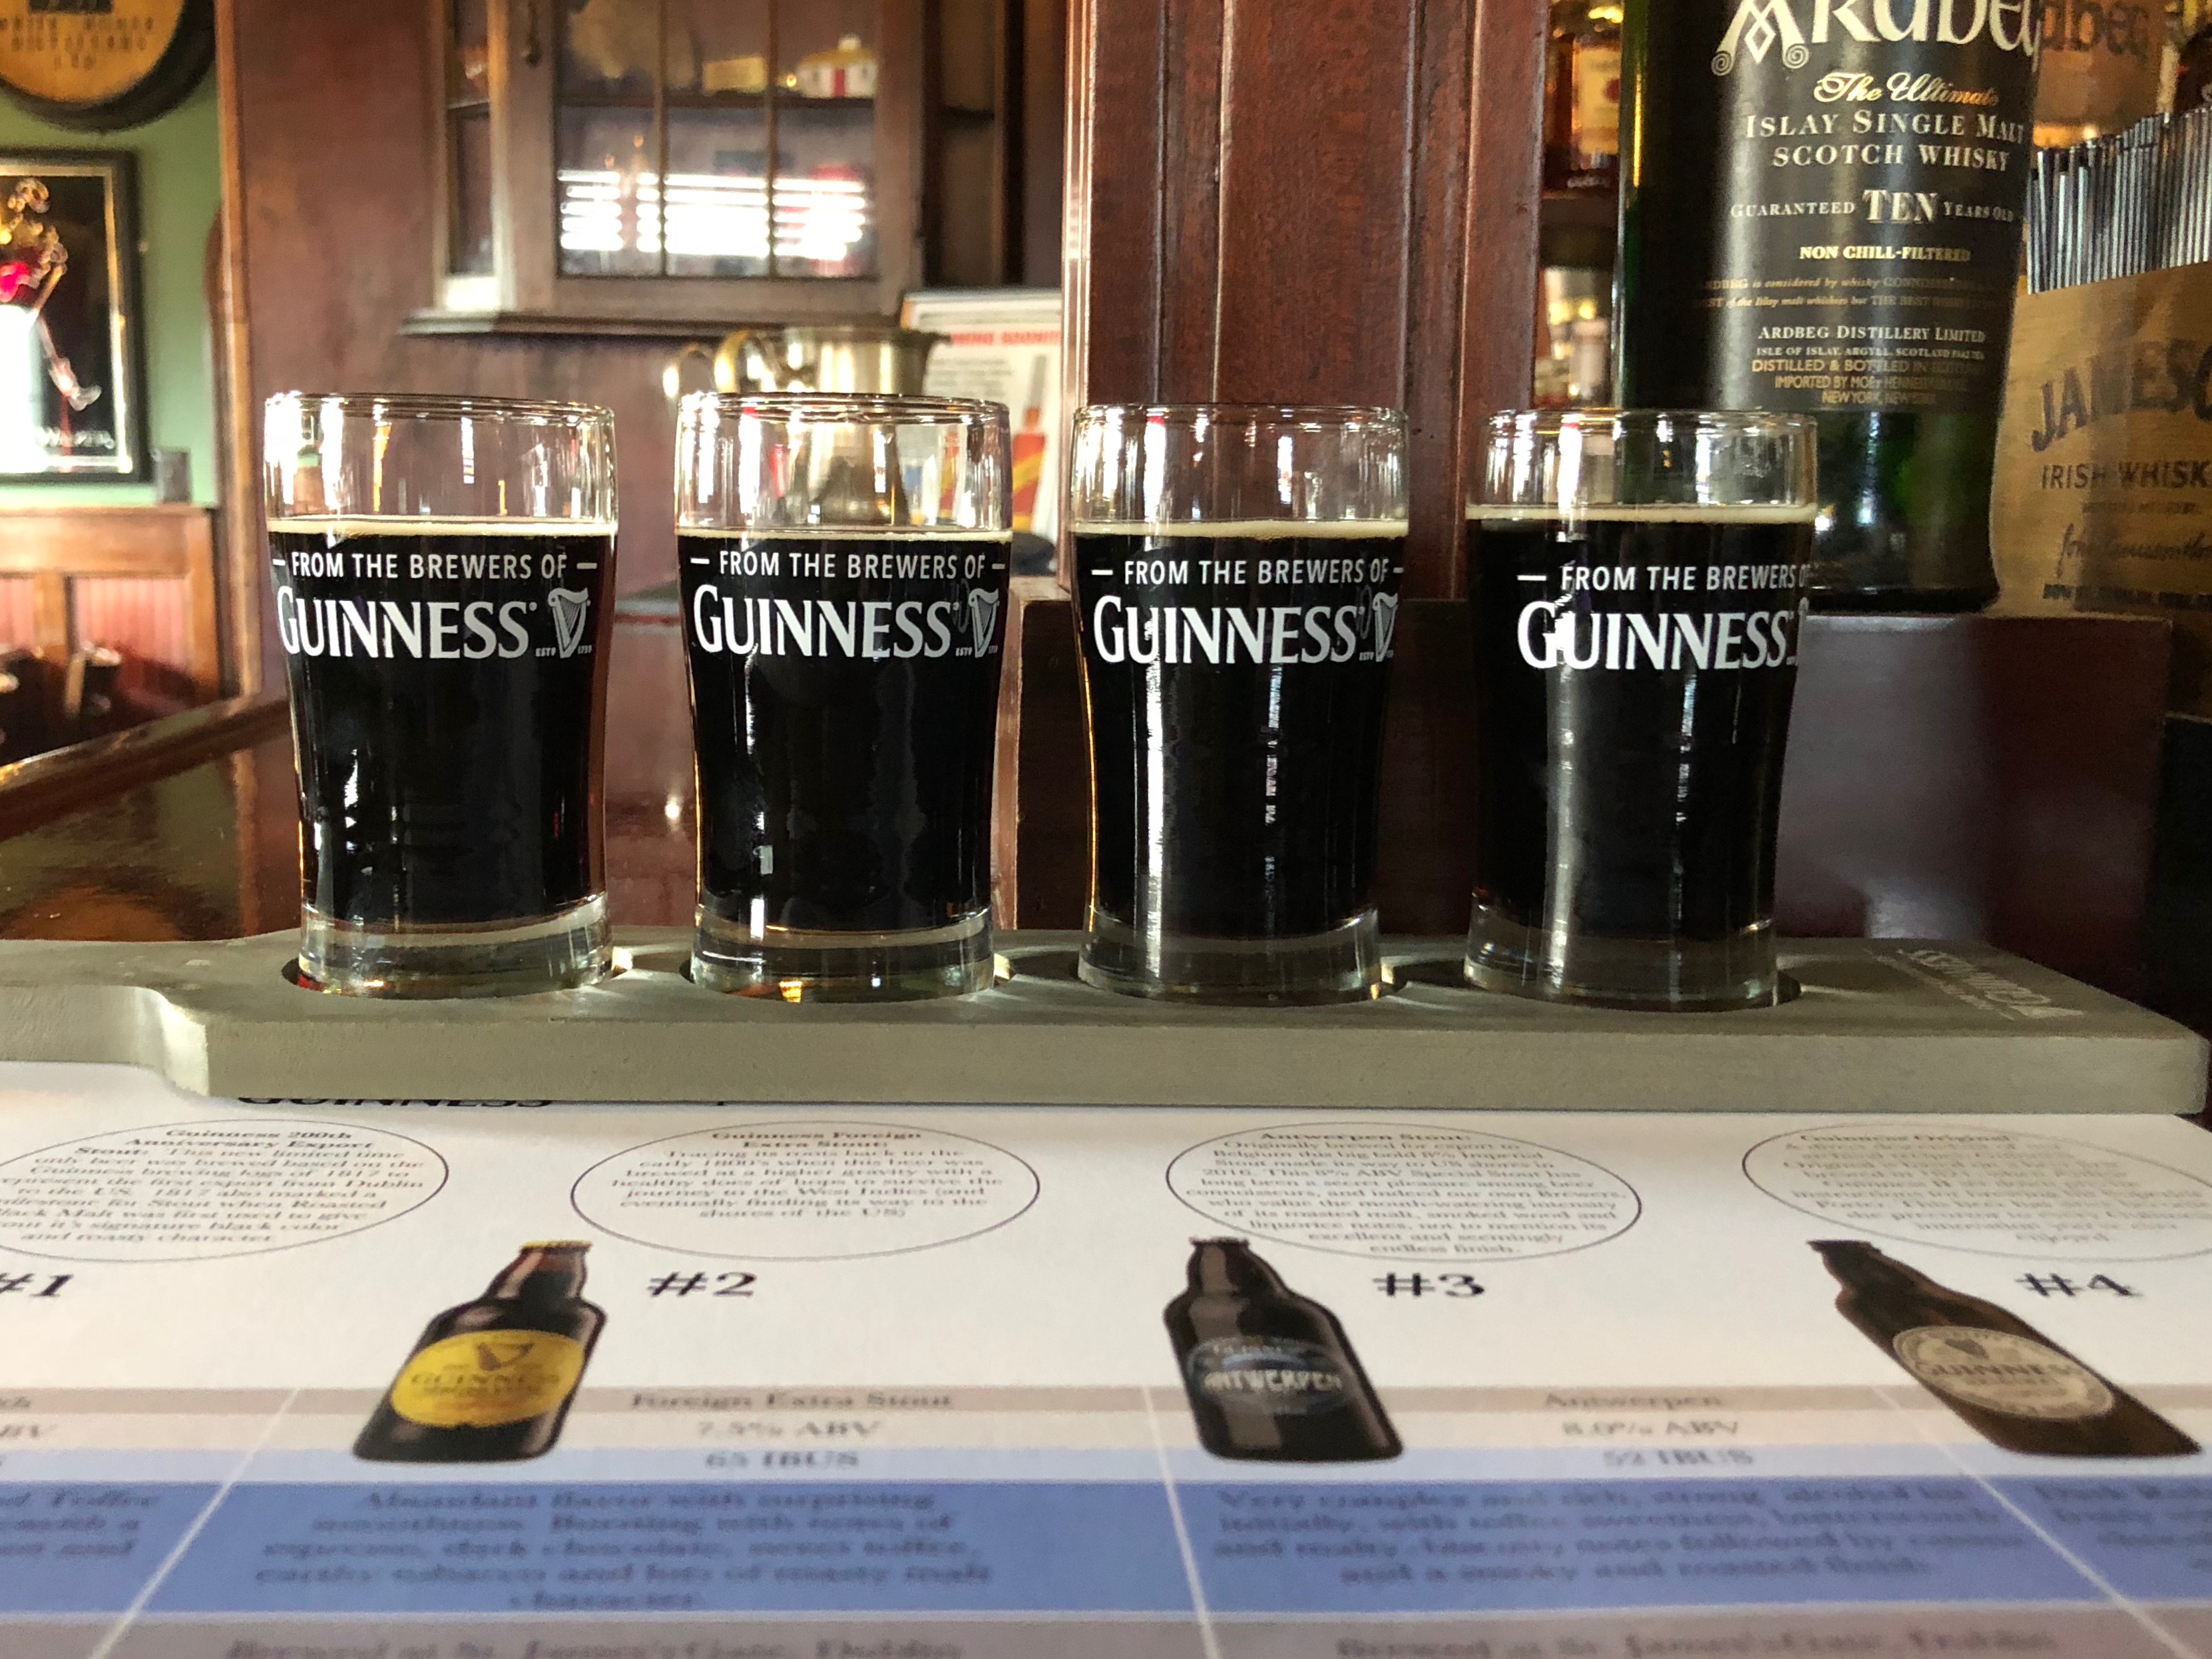 Ambassadors from Guinness made their way to the Highland Stillhouse to present the 200th Anniversary Export Stout.